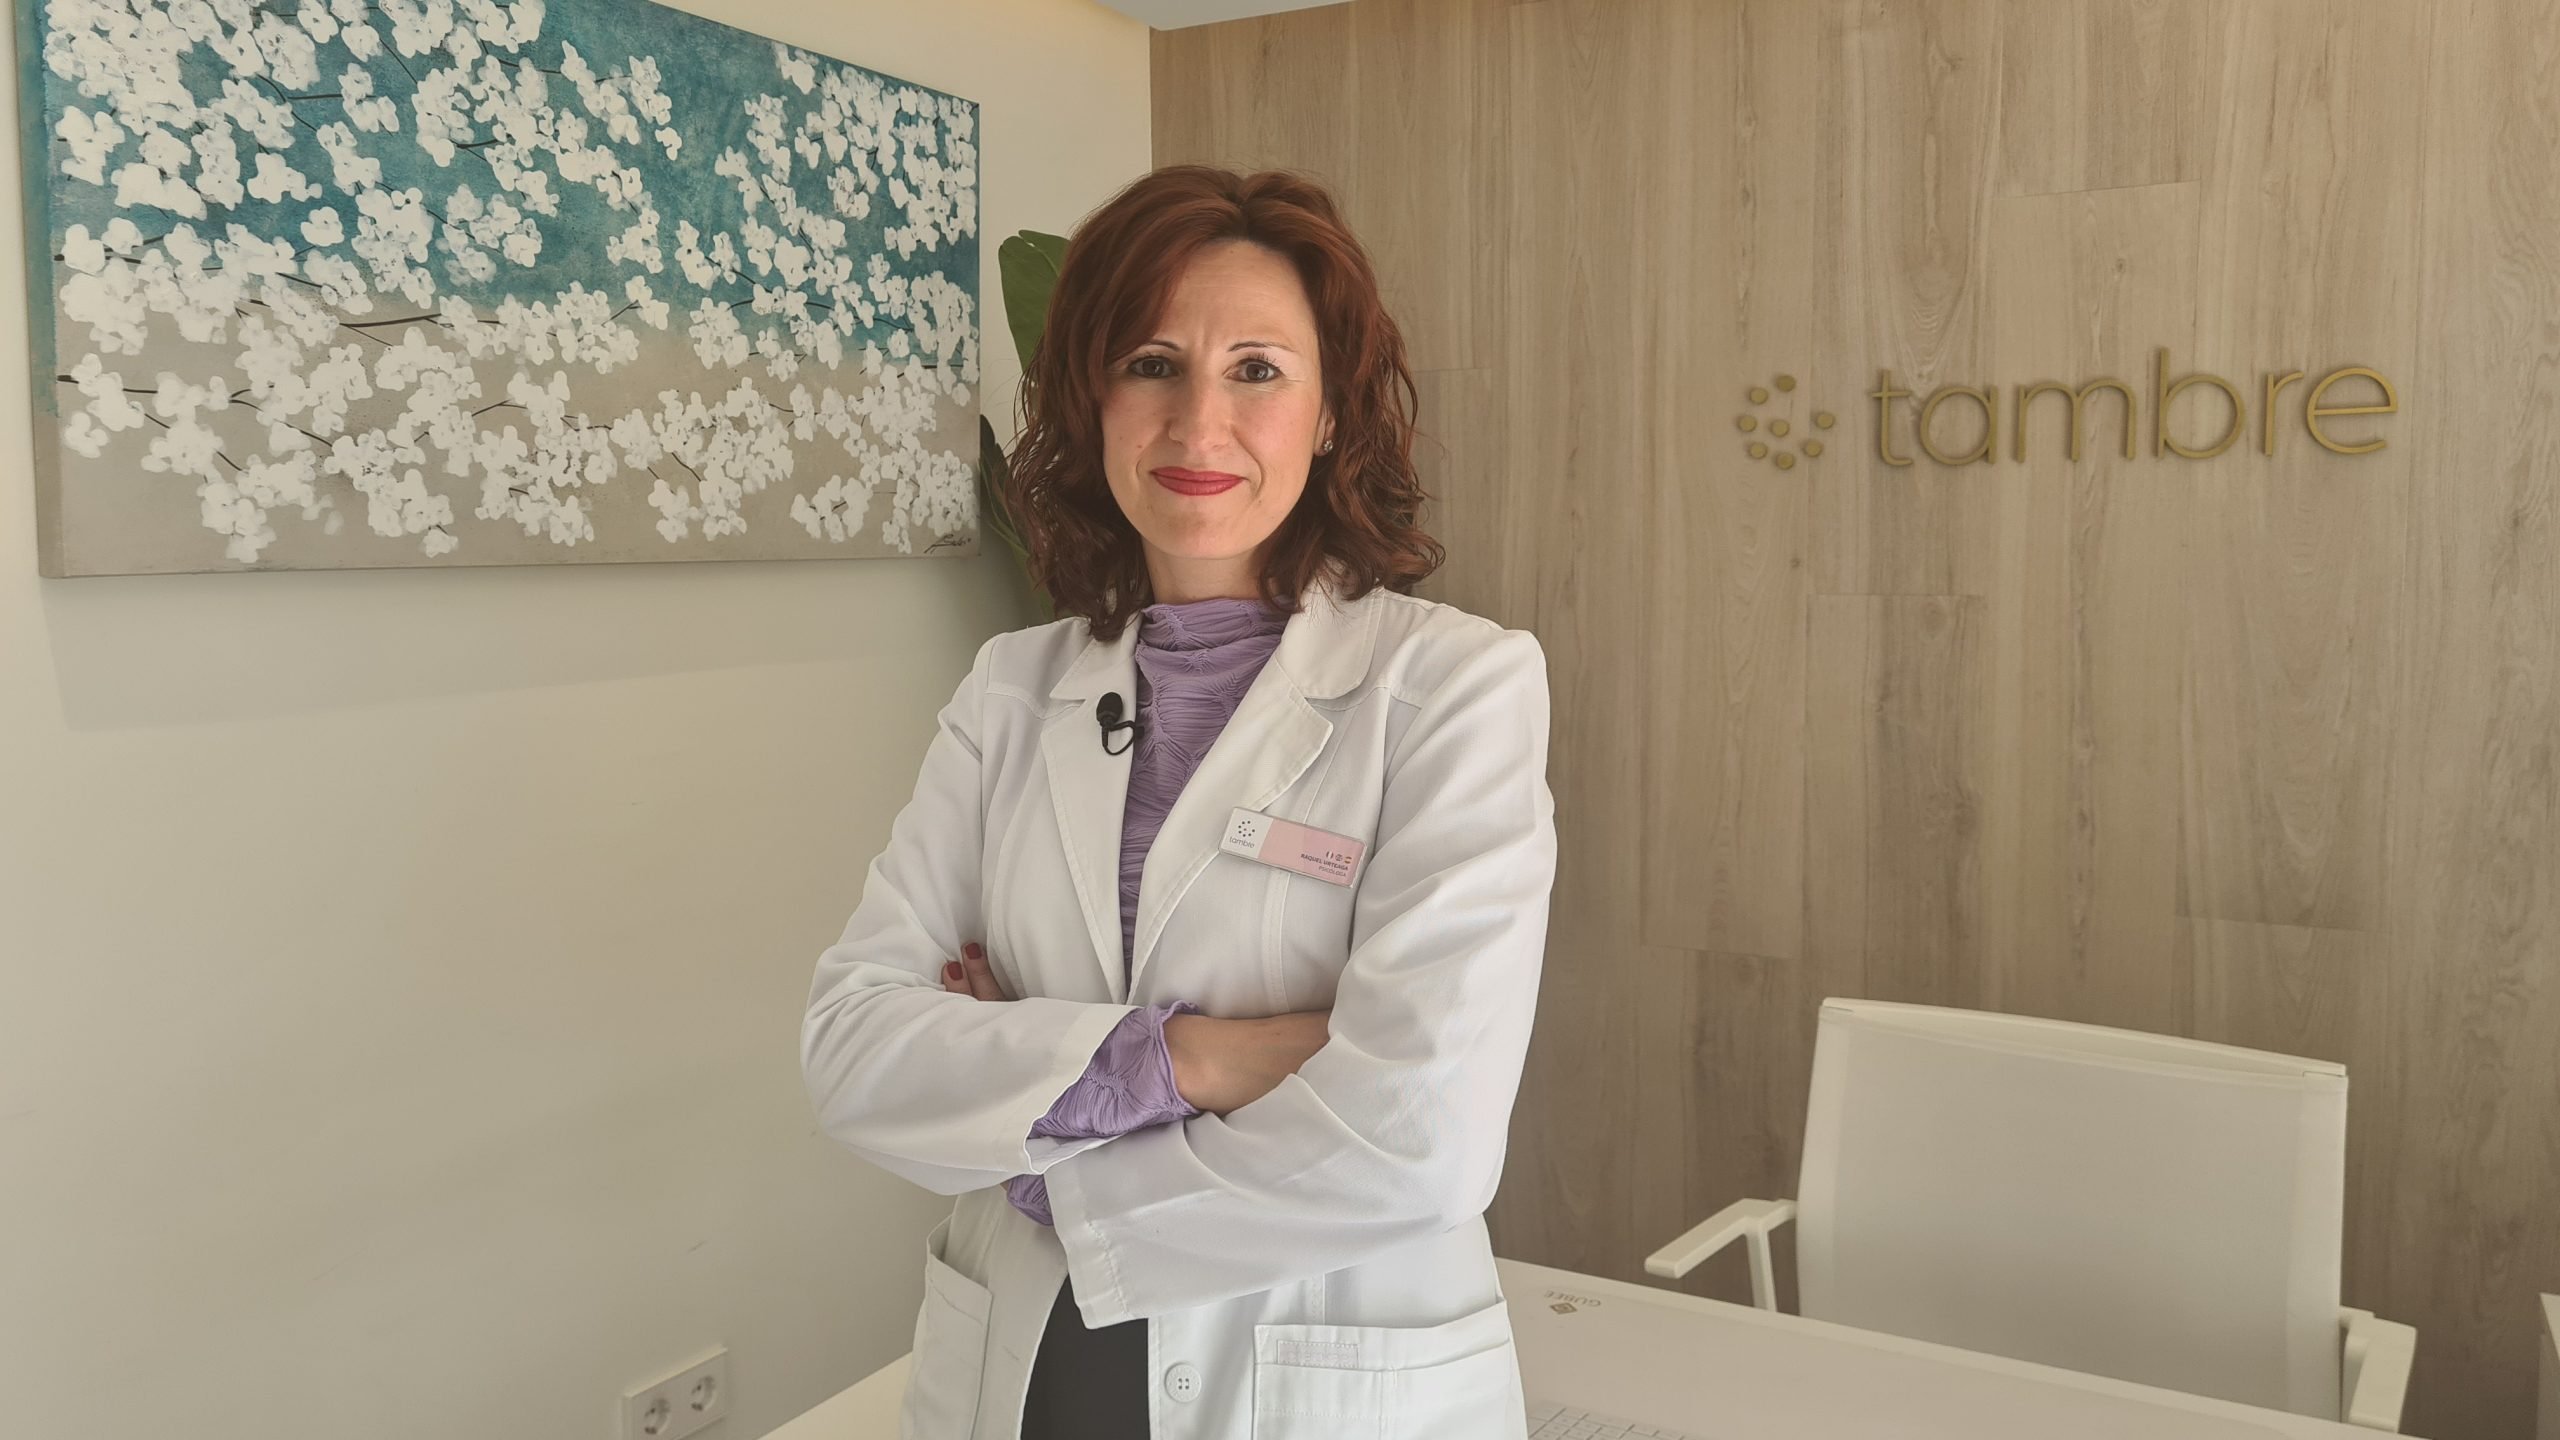 Raquel Urteaga, Specialist in Assisted Reproduction in the Psychology Unit at Clinica Tambre